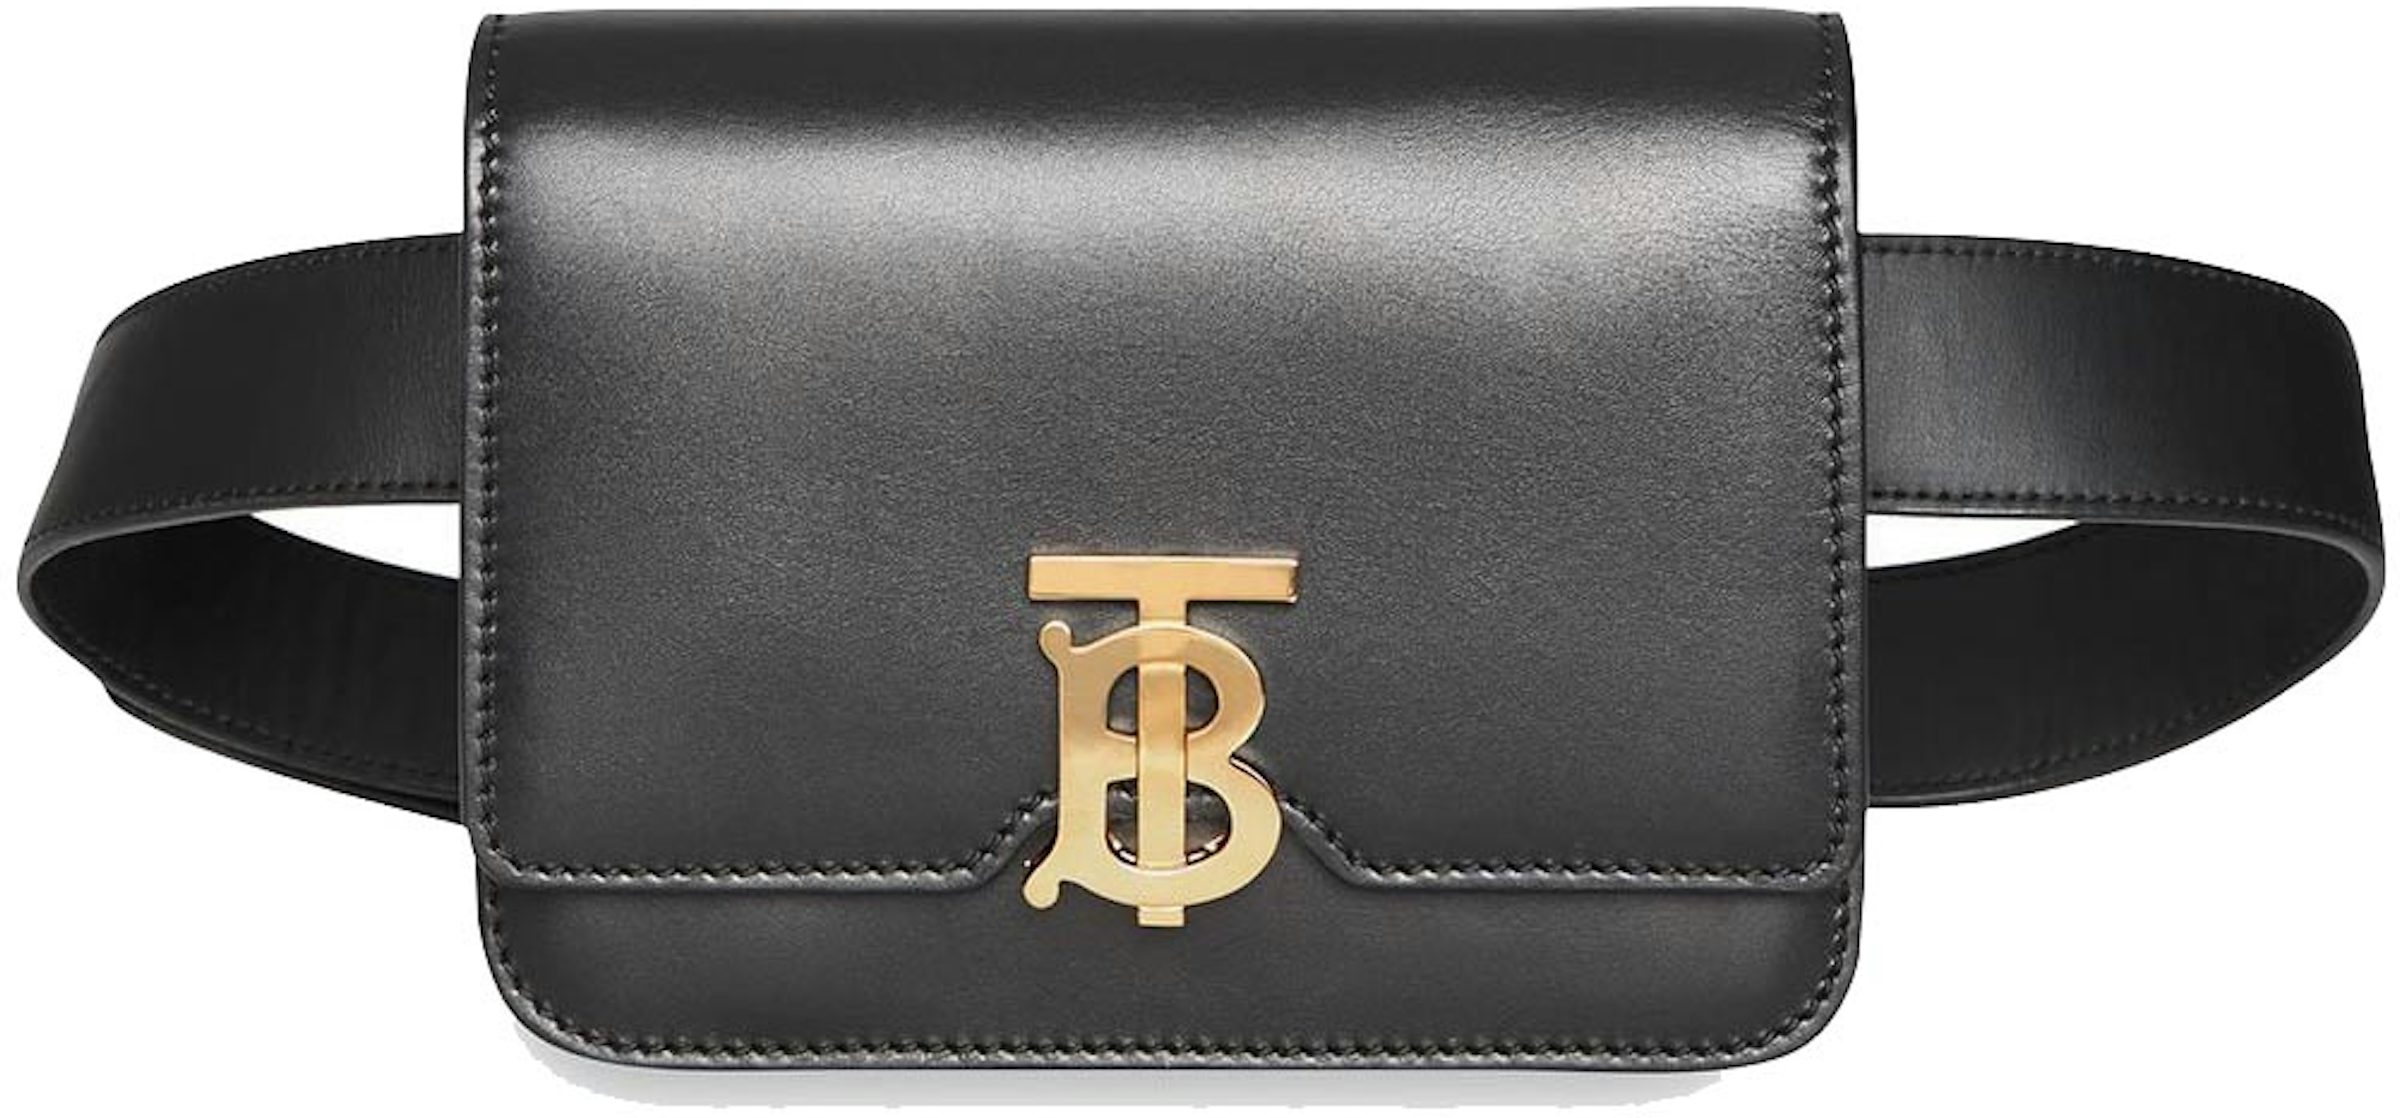 Small TB Leather Bag Burberry Accessories_Clothing Bags Black